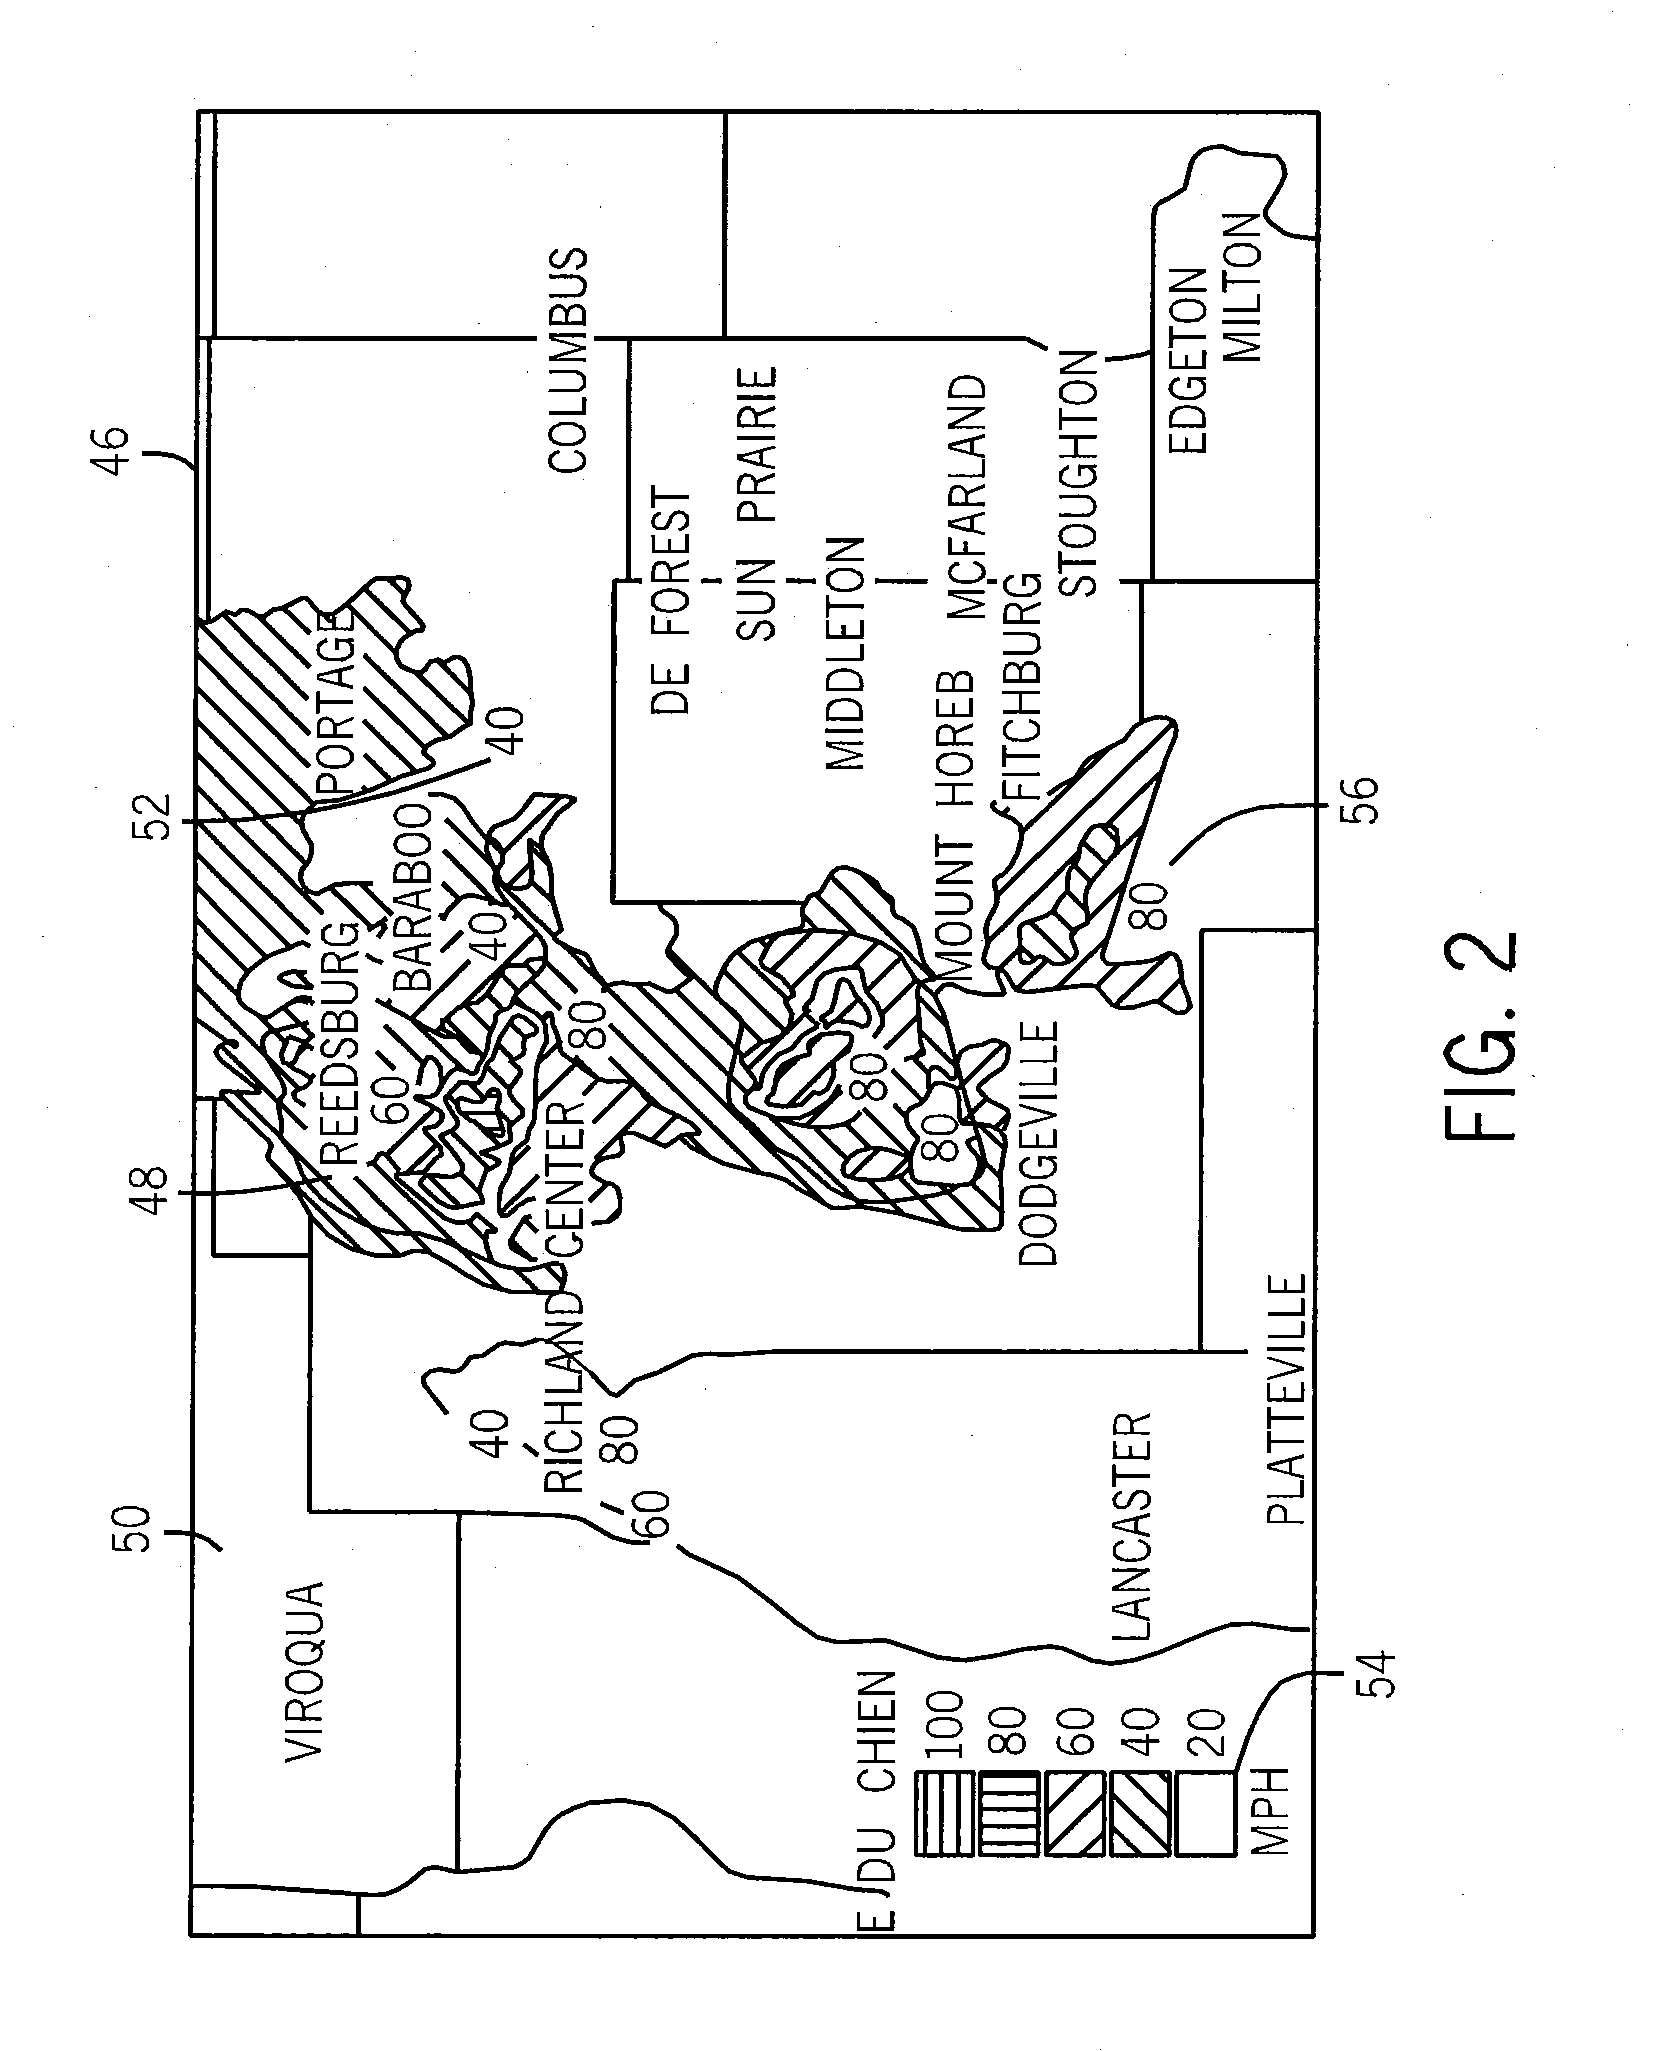 System and Method for Presenting Wind Speed Information in a Planar Representation